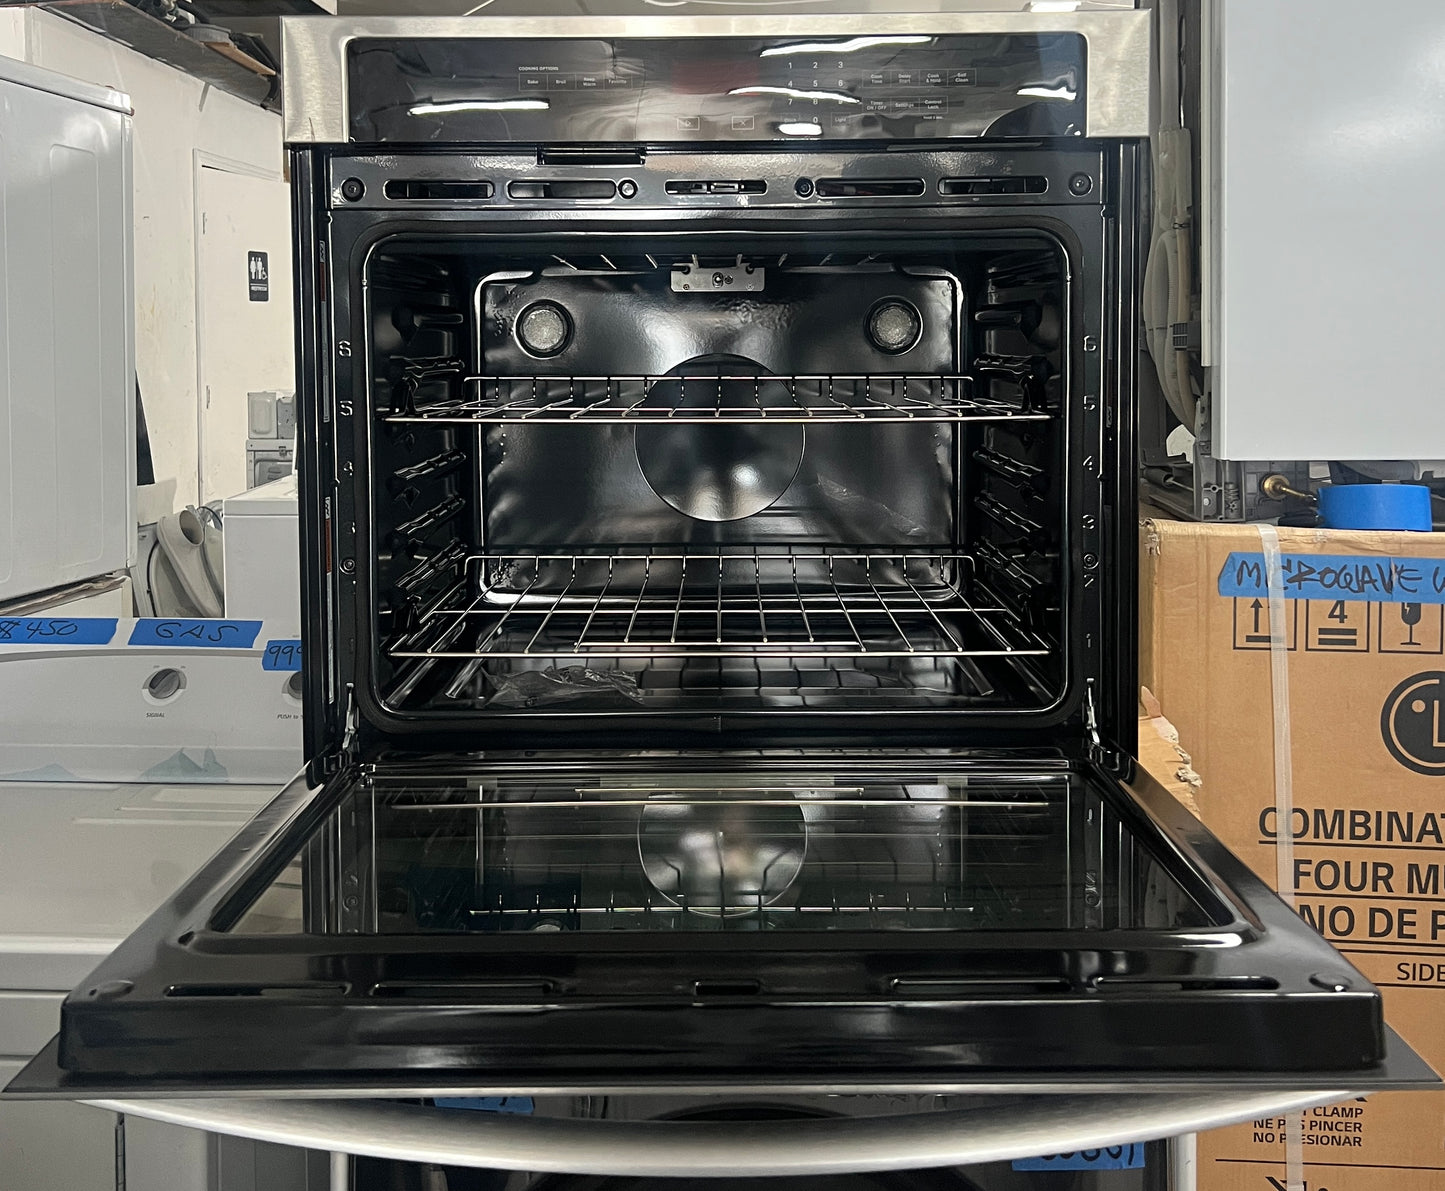 Whirlpool 30 5.0 Cu. Ft. Electric Single Wall Oven WOS31ES0JS,Keep Warm SettingmAdjustable Self-Cleaning Technology,HIdden Bake Element,Control Lock,Delay Start,Closed Door Broiling,Eletronic Touch Controls,Sabbath Mode,ADA,New,999149